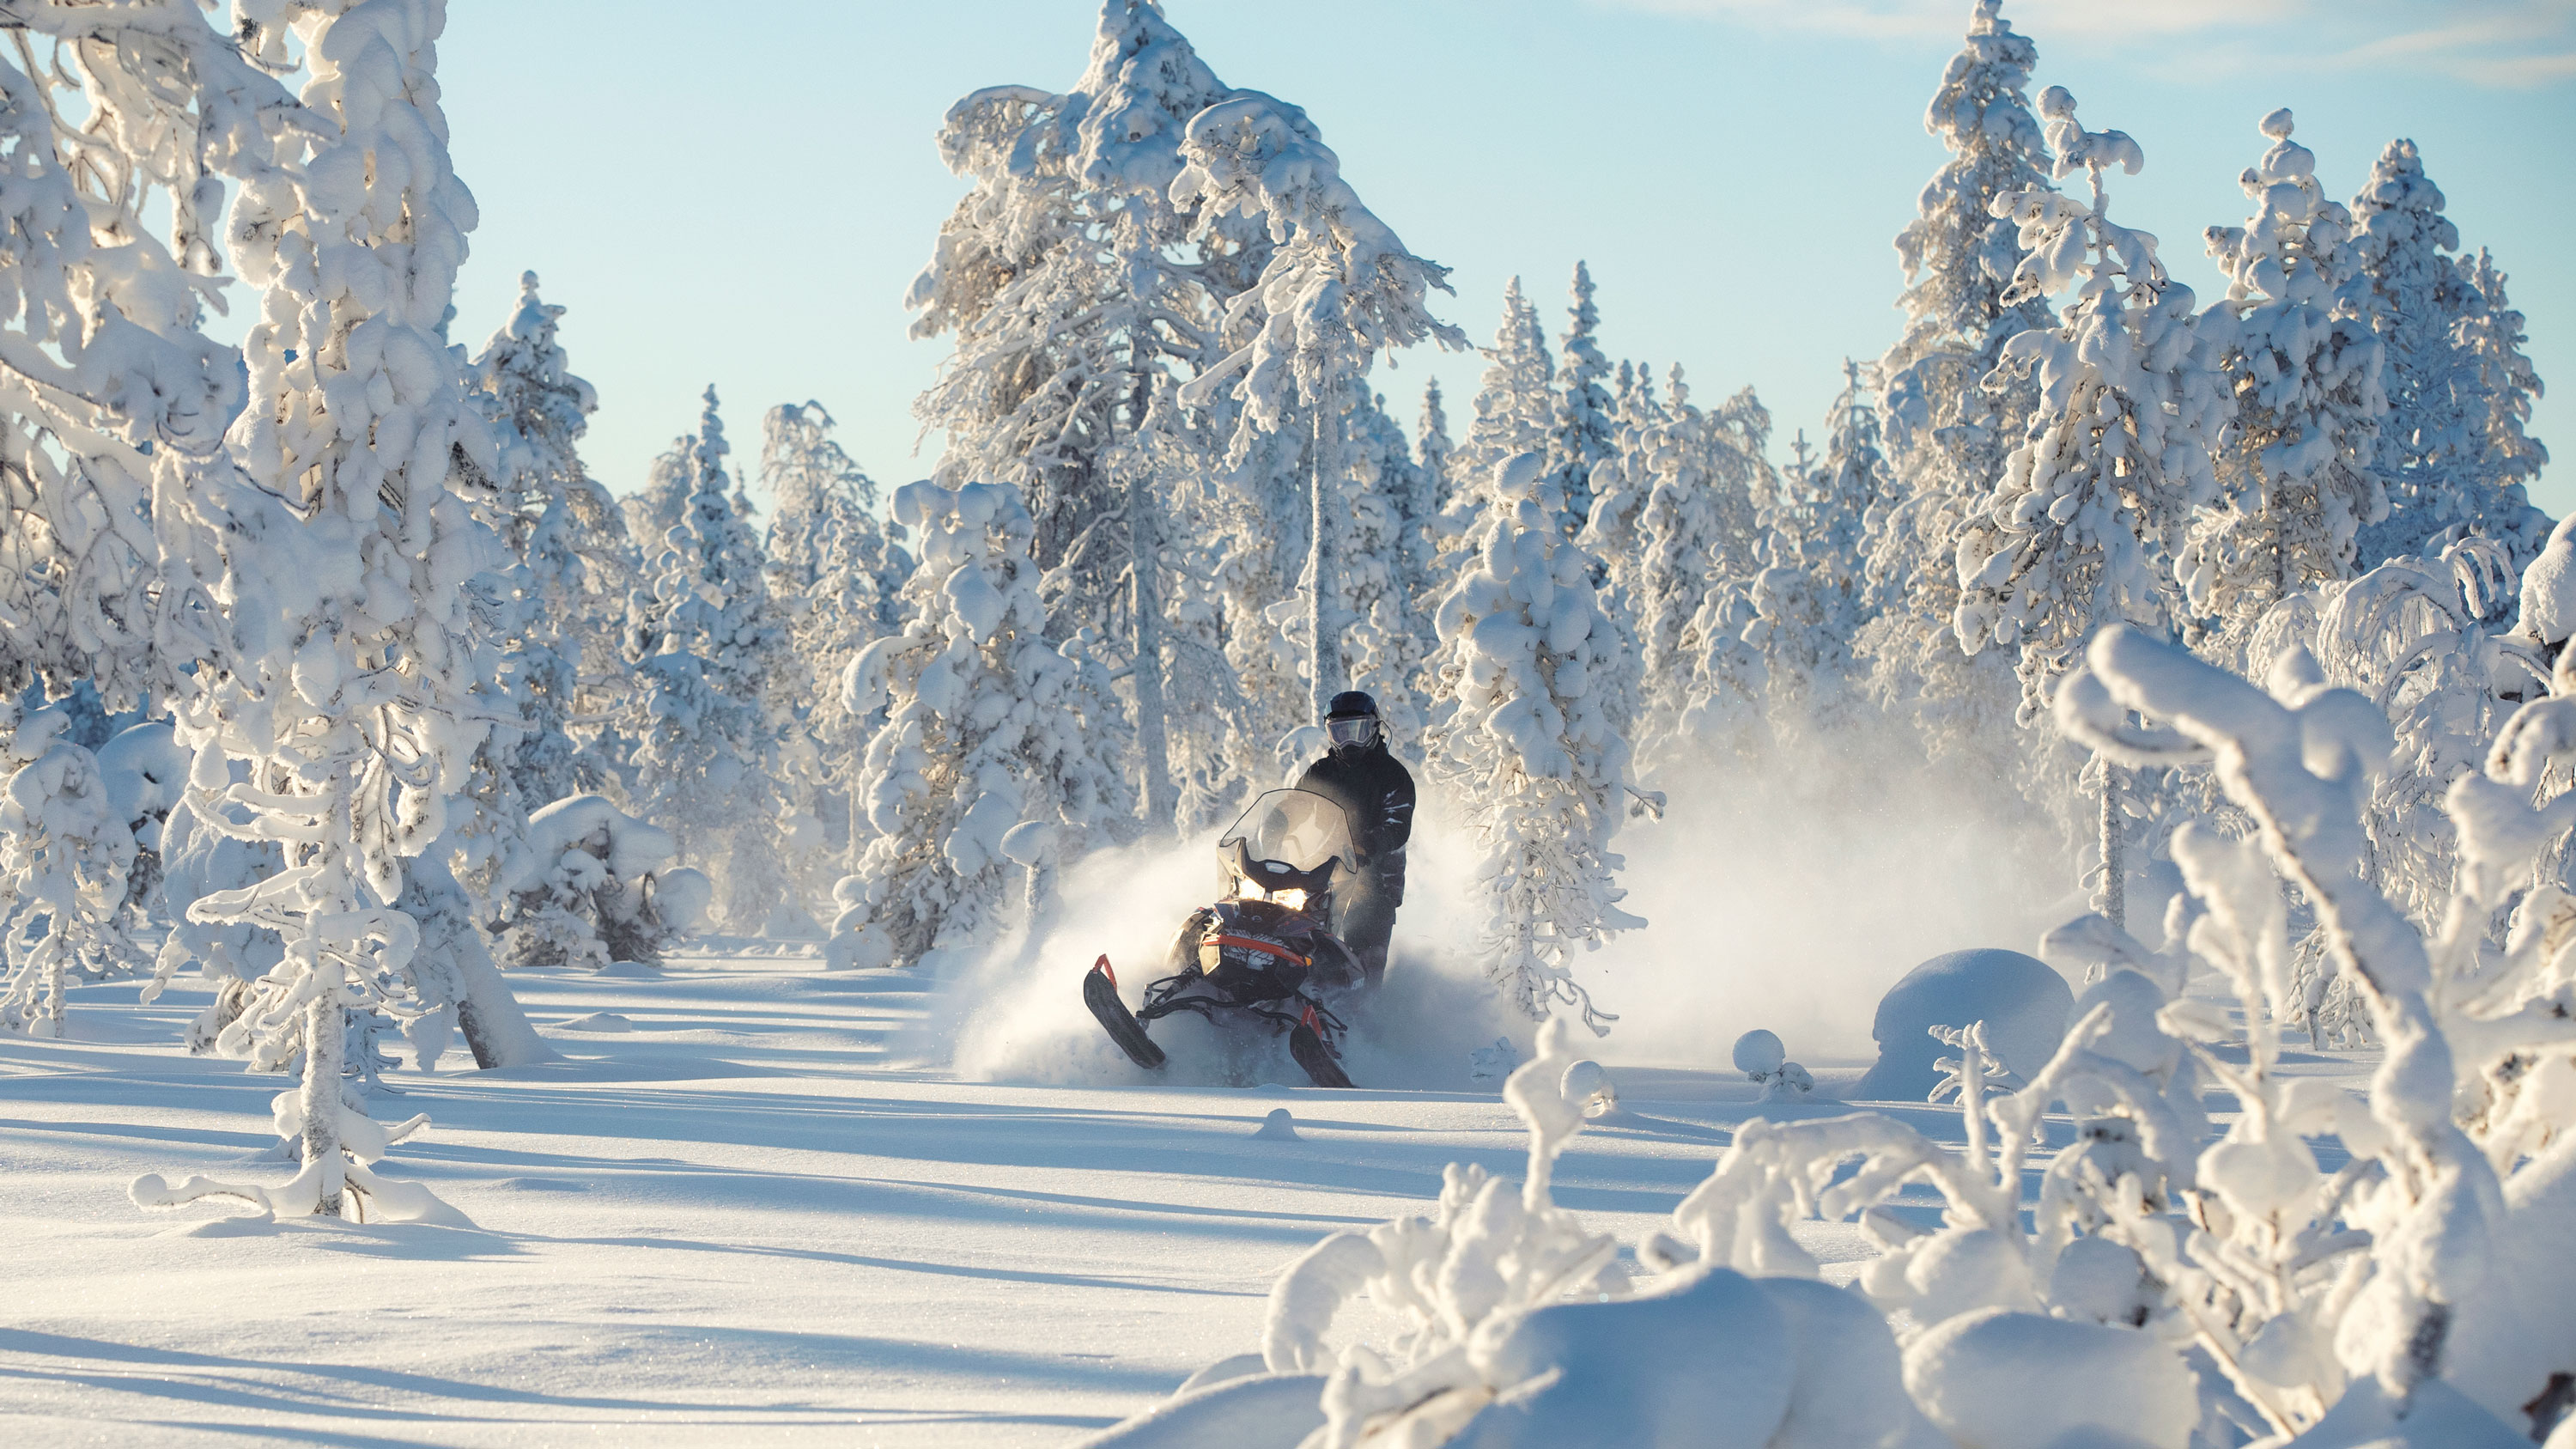 Lynx Commander Grand Tourer snowmobile riding in snowy forest